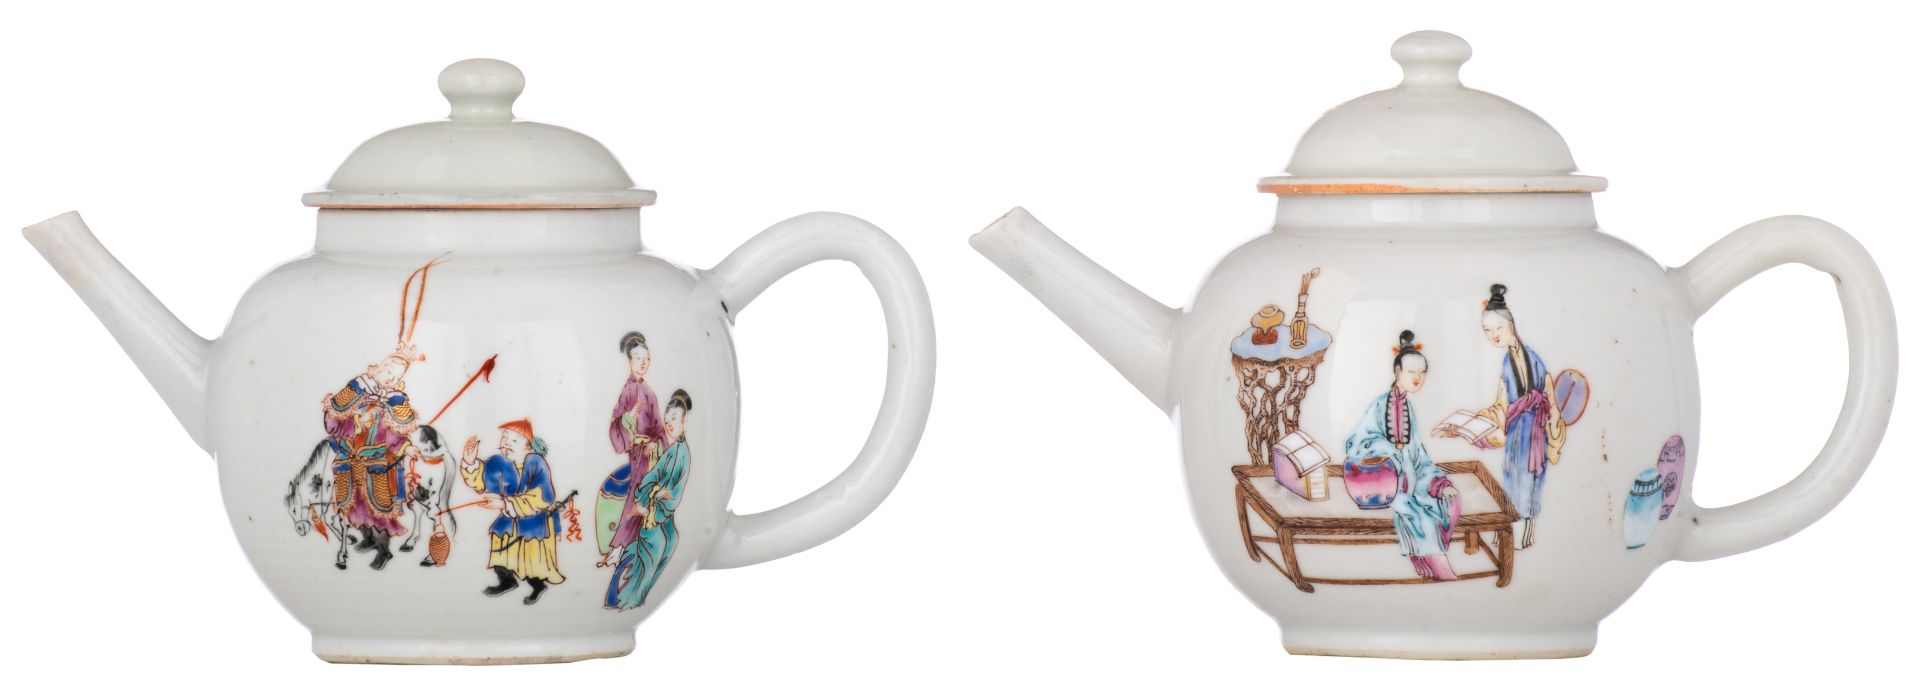 Two Chinese famille rose export porcelain teapots and covers, decorated with gallant scenes, 18thC,